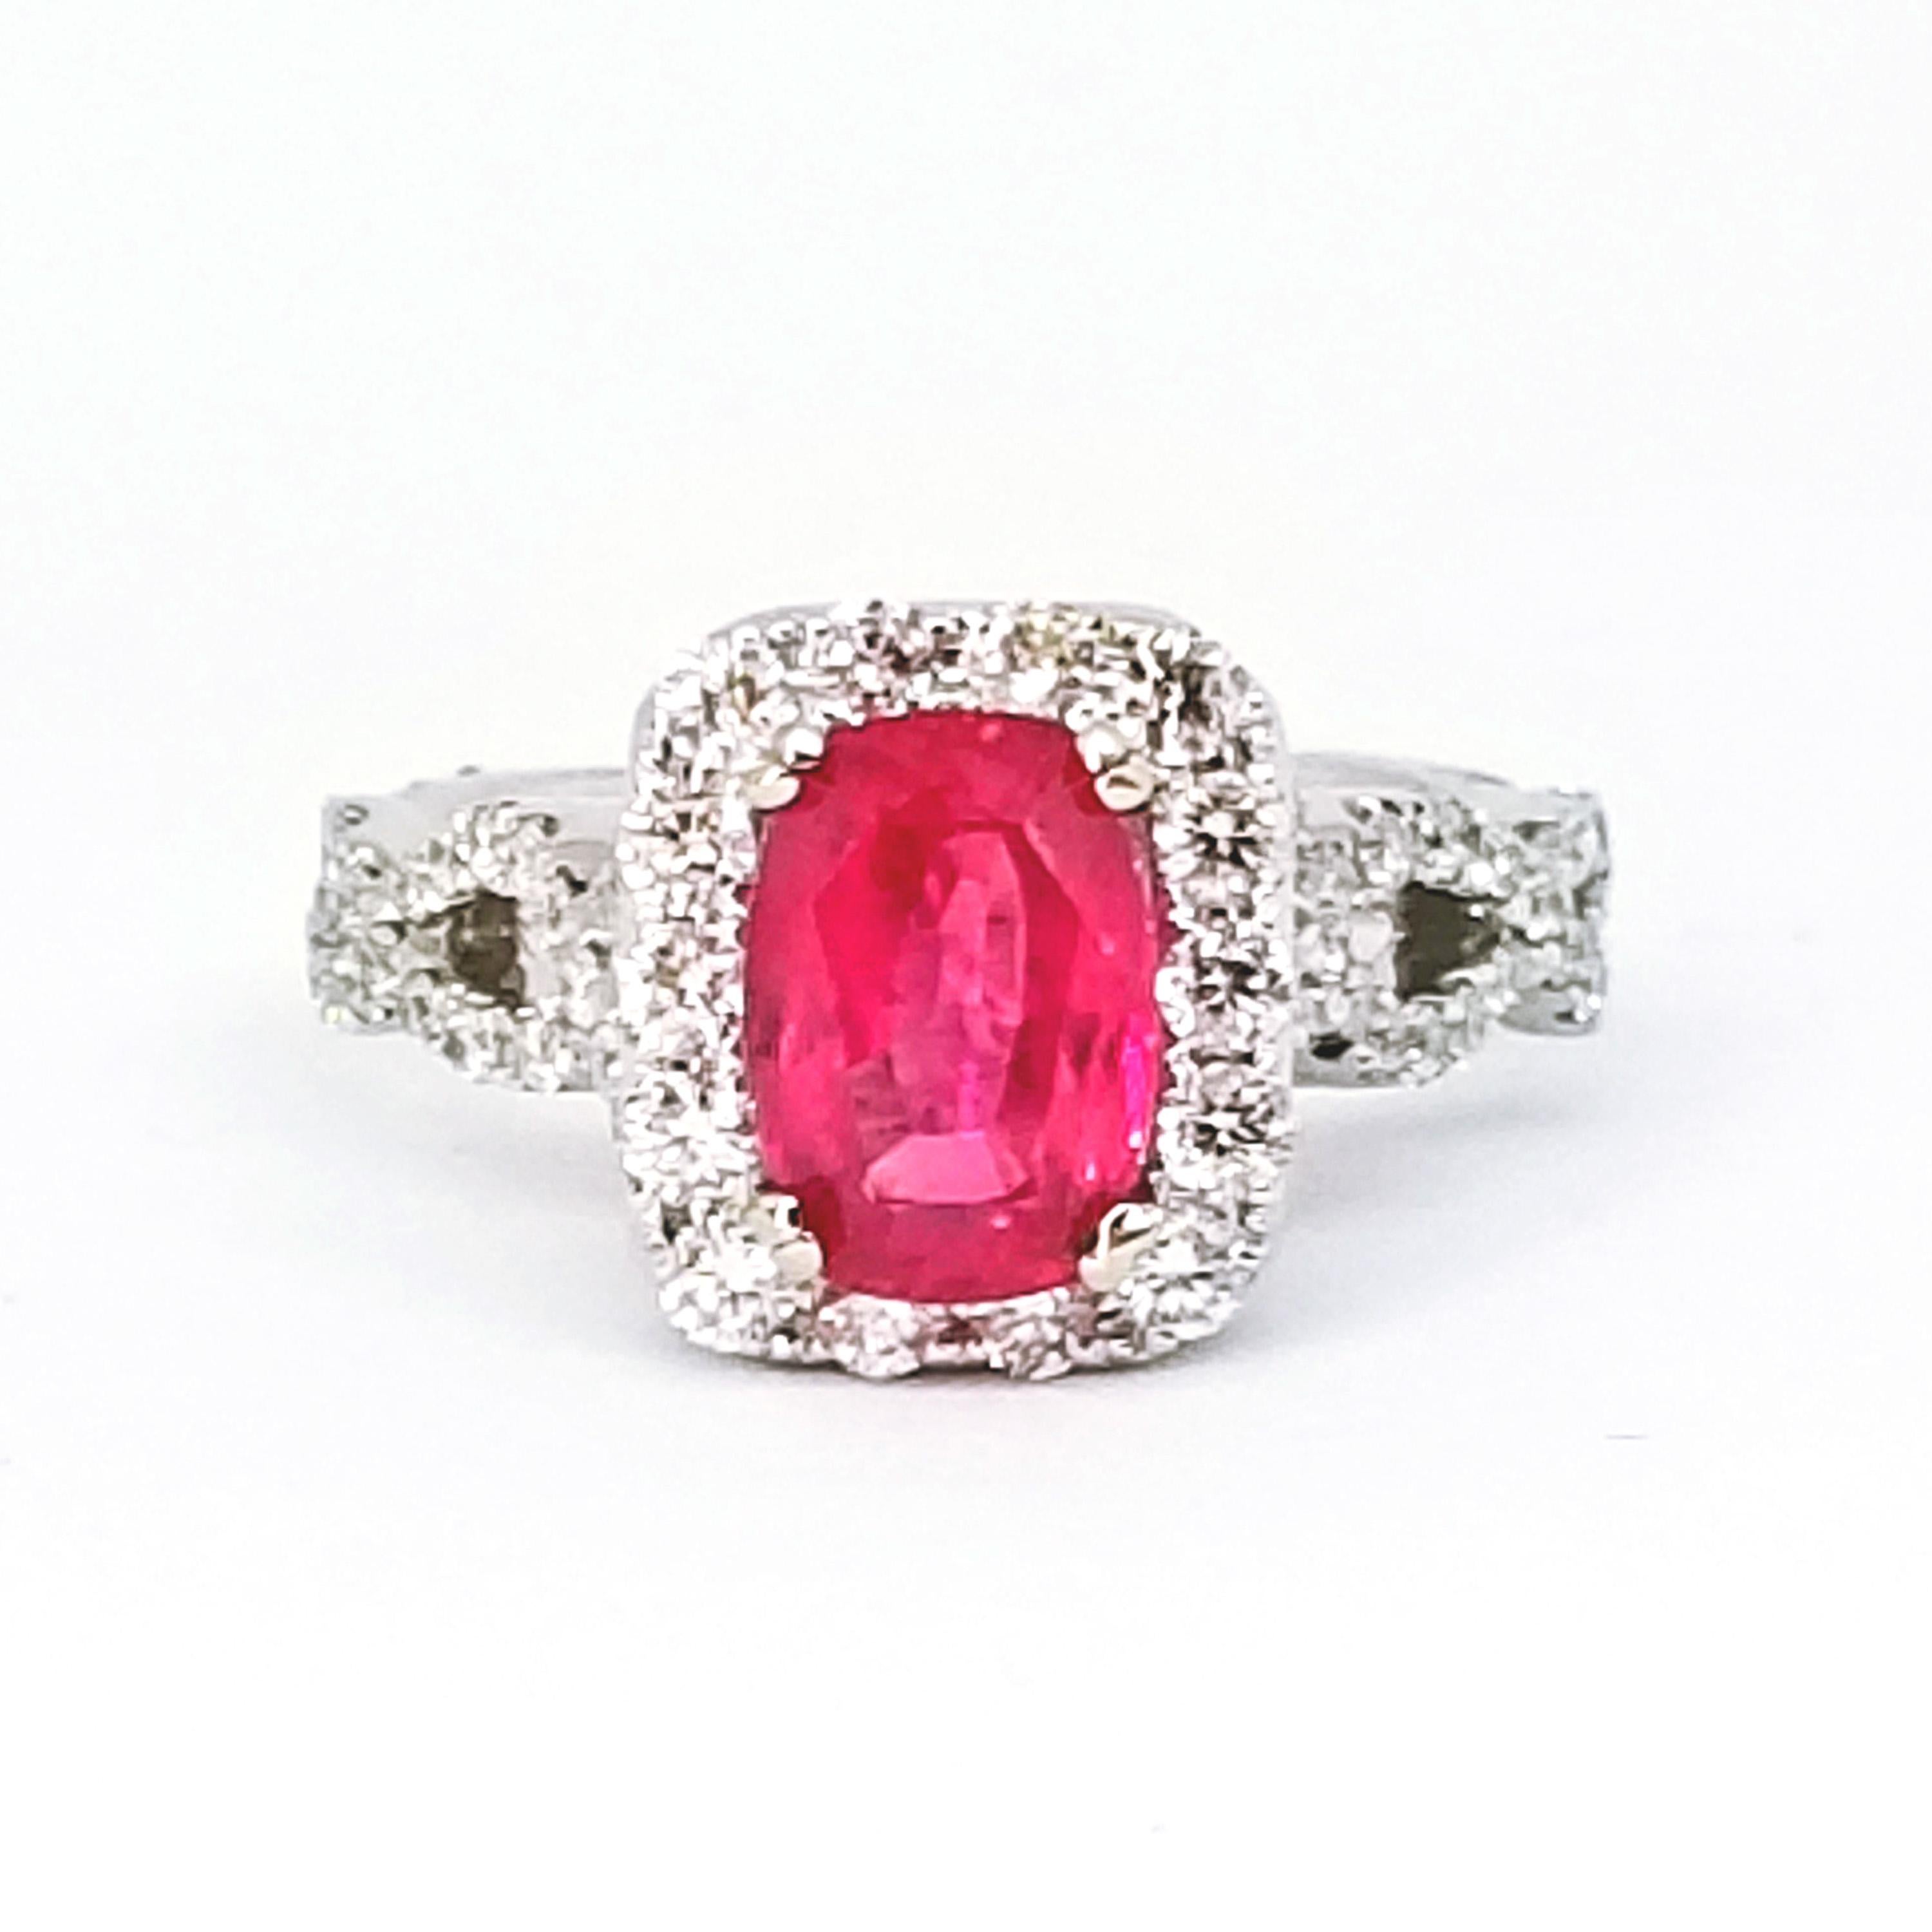 A Contemporary Engagement or Cocktail Ring is set with a 2.19 Carat Edwardian Cut Intense Pink Sapphire with Deep Color Saturation. The Gem ranges in Color from Deep Pink to Pink Red and is surrounded by a Halo of Round Brilliant Diamonds. The Woven